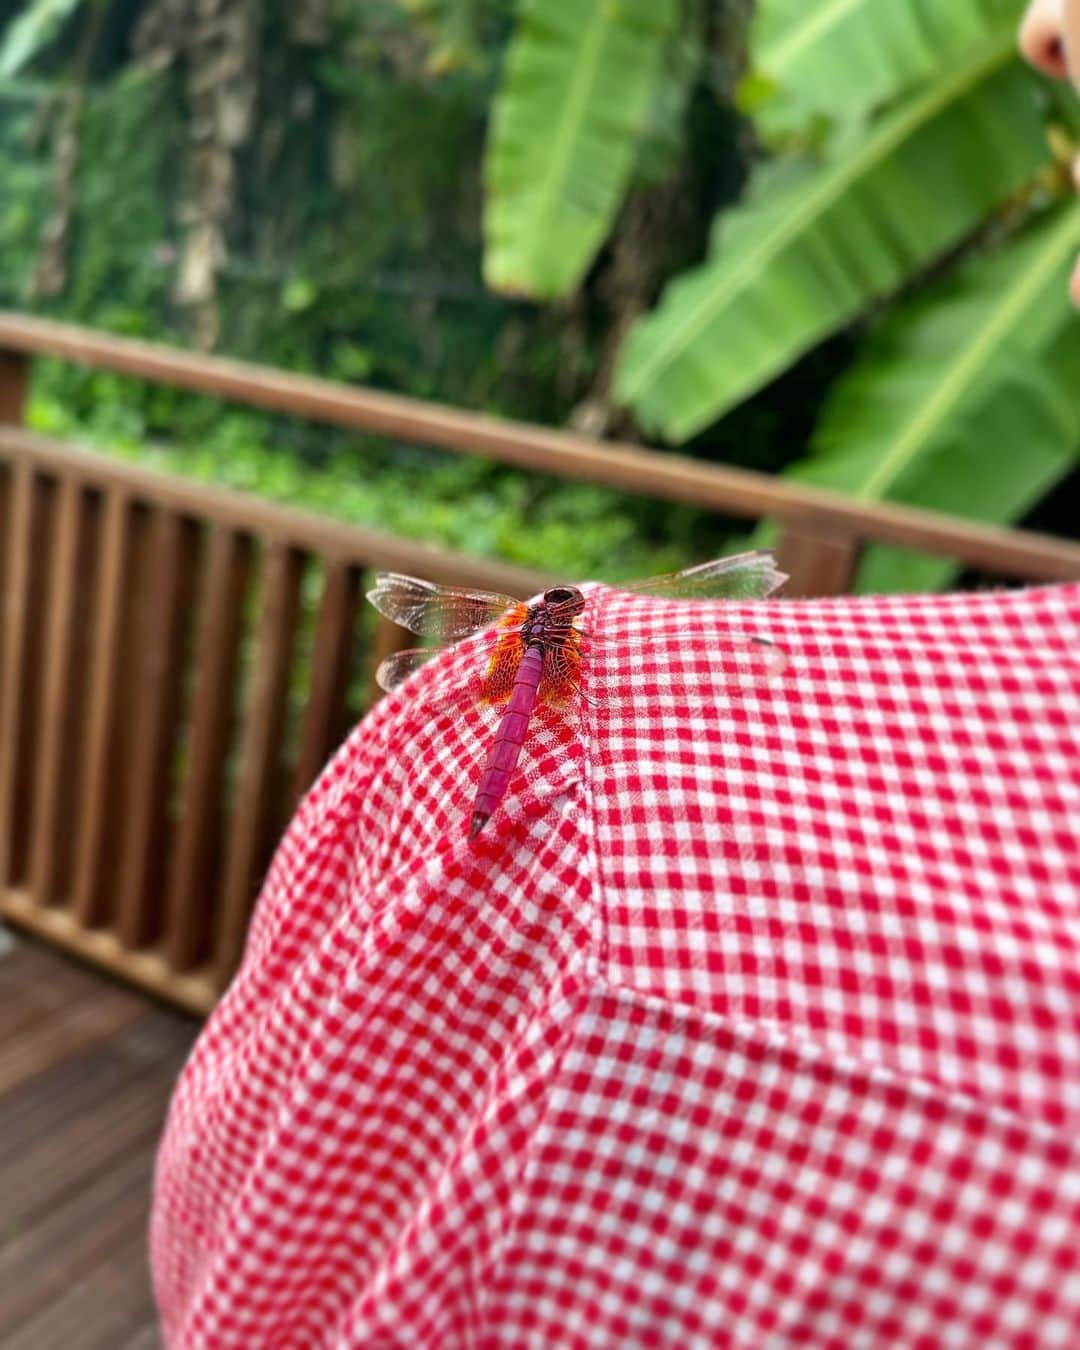 下條ユリのインスタグラム：「🪷ピンクの蜻蛉🩷 A RARE, PINK DRAGONFLY brought me messages at the end of my travel. "Magenta" stayed on my shoulder for at least 20 min. She then guided me from the lotus pond to my hotel along a busy street in Taipei! What did she try to tell me ?   “#Dragonflies  symbolize transformation and rebirth. Stripping away old beliefs to the deeper meaning of life with self-realization.   They are the keeper of dreams, the knower within that sees all of our true potential and ability. They connect us with the power of color and the ability to work with many different colors to achieve anything we want to experience in life.  Rare to encounter, but #PinkDragonfly exists. They could signify that love and romance are about to blossom in your life. Embrace this change.”   Mmm… 🩷Thank you, Magenta !!   Still being a nomad since I left NY in June, I returned to Kyoto with overwhelming feelings from each place. I will start to post ( & story ) my journey to process and share the colors I was immersed in.  P.5 P.6 "Dragonflies 蜻蛉" (2005)  The heart-shaped lovemaking dragonflies / ハート型になってメイクラブする蜻蛉の絵 30 x 22.5” ( 76.2 x 57.2 cm)  Sumi, Japanese watercolor and gouache on paper  6月から続く旅の終わり、不思議なメッセージを受け取りました。台湾の蓮の池で、珍しいピンクの蜻蛉がわたしの肩に止まり、それからしばらく(少なくとも20分は)そこいてくれて、車の往来の激しい台北の道沿いをずーっと一緒に歩いてホテルまで送ってくれたのです。さて、調べてみると…  【蜻蛉からのメッセージ】 「変革と再生。古い信念を取り除き、自己実現とともに人生のより深い意味を目指します。  蜻蛉は夢の守護者であり、私たちの真の可能性と能力をすべて理解している内なる知識者です。私たちを色の力と、さまざまな色を使って人生で経験したいことを達成する能力と結びつけます。  ピンクの蜻蛉は滅多に出会えませんが実在します。ピンクの蜻蛉はあなたの人生に愛とロマンスが開花しようとしていることを示しています。変化を受け入れて。」  ふふふー🩷　なるほどー マジェンタちゃんありがとう  6月にNYを離れて以来の遊牧民生活、北から南への長旅からついに京都に戻りました。それぞれの土地での忘れられない時間、ただいま飽和状態です。各地で浴びたいろいろな色と形をゆっくり消化し、その気持ちをまとめながら、少しづつstory とここにシェアしていきます。  #Pink #Dragonfly #蜻蛉  #MagentaDragonfly」